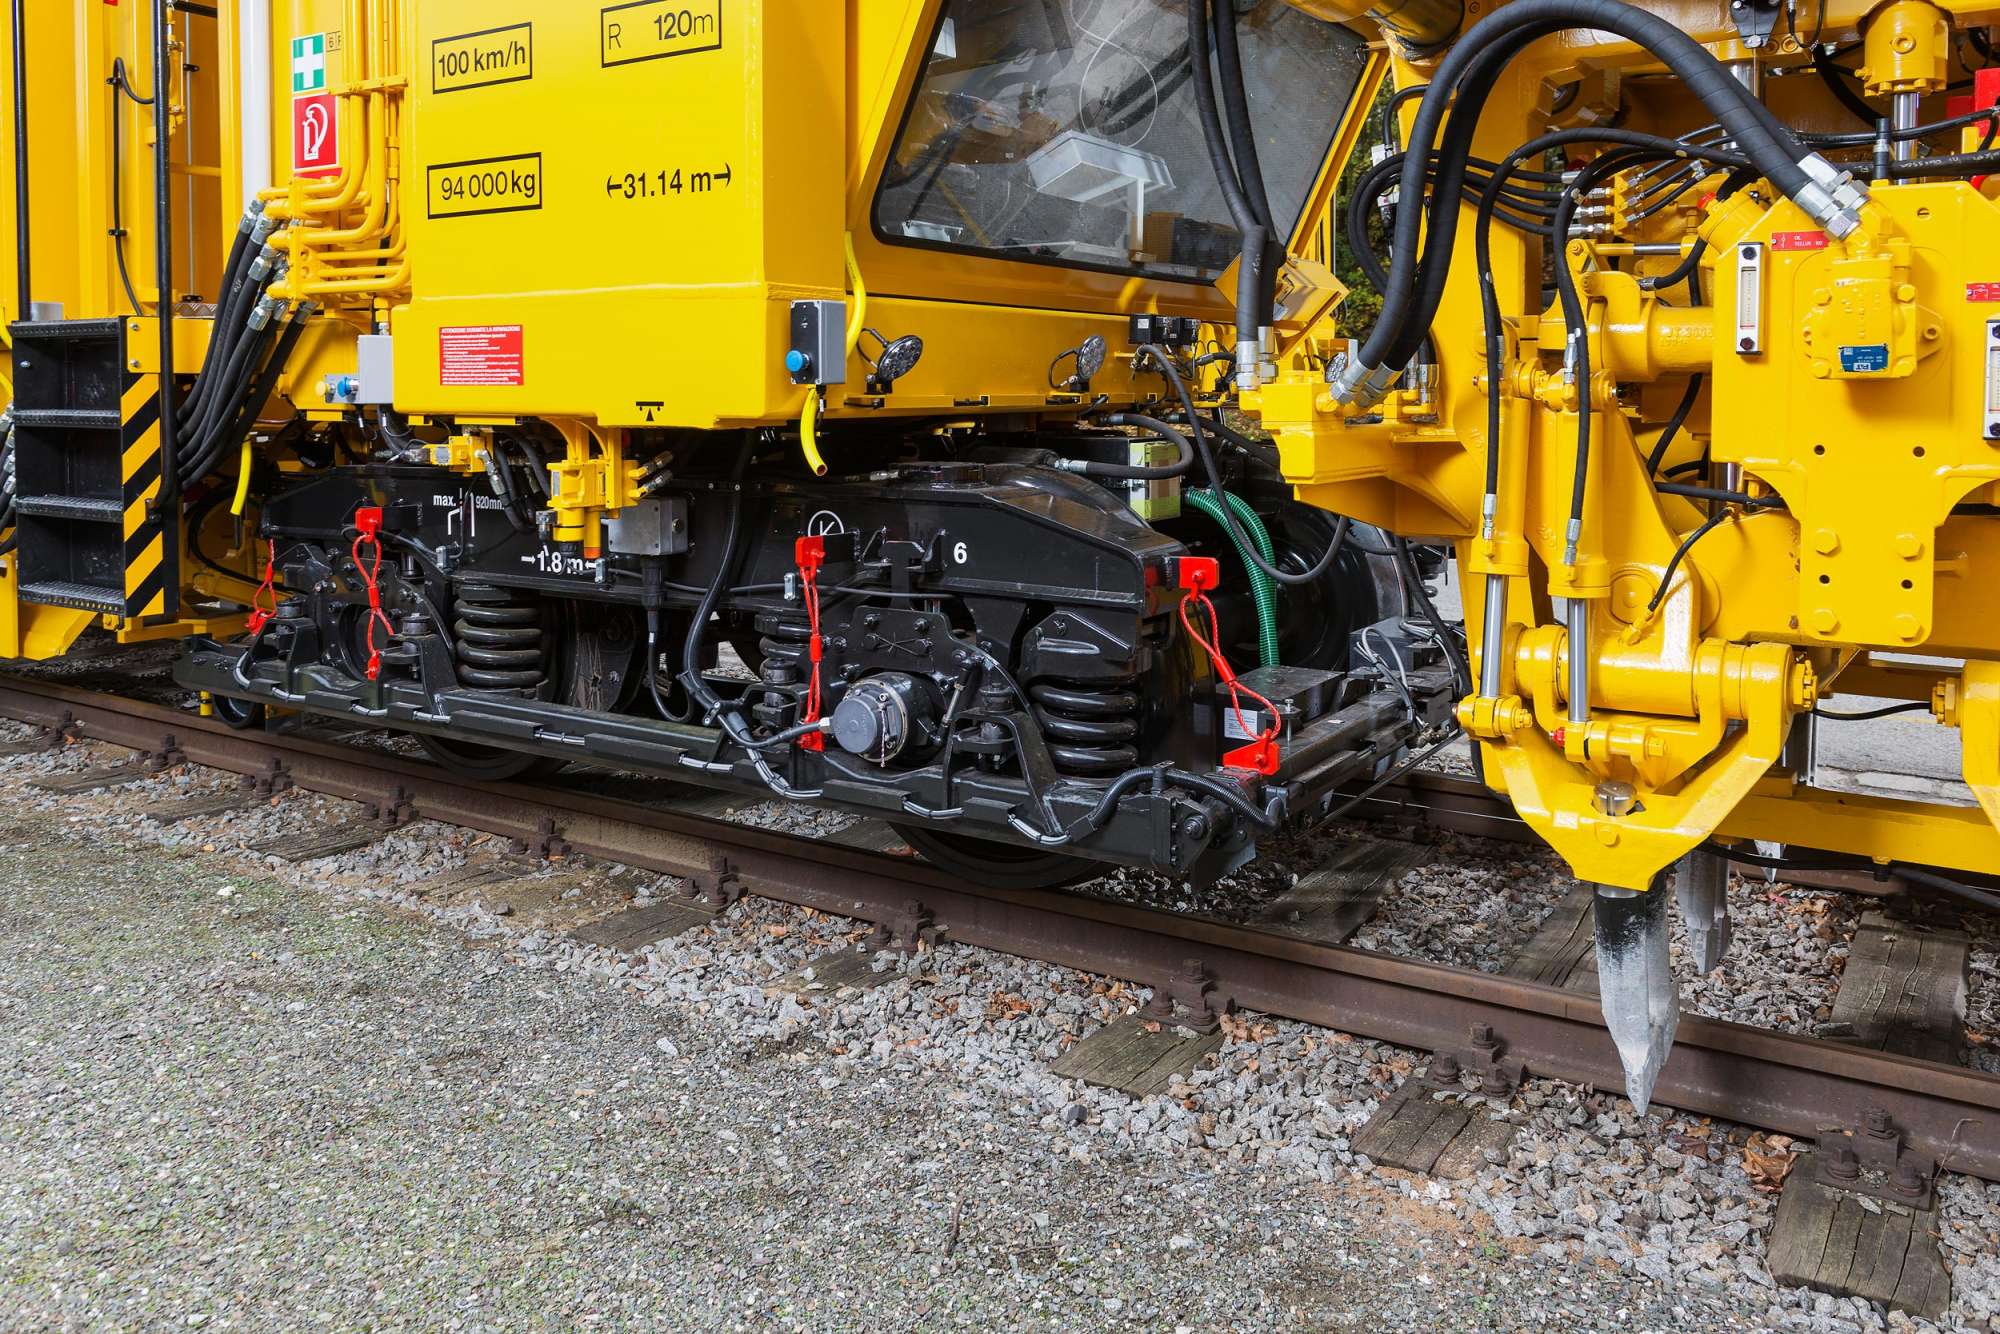 This is how we create new opportunities of cooperation between track maintenance machines and the infrastructure.